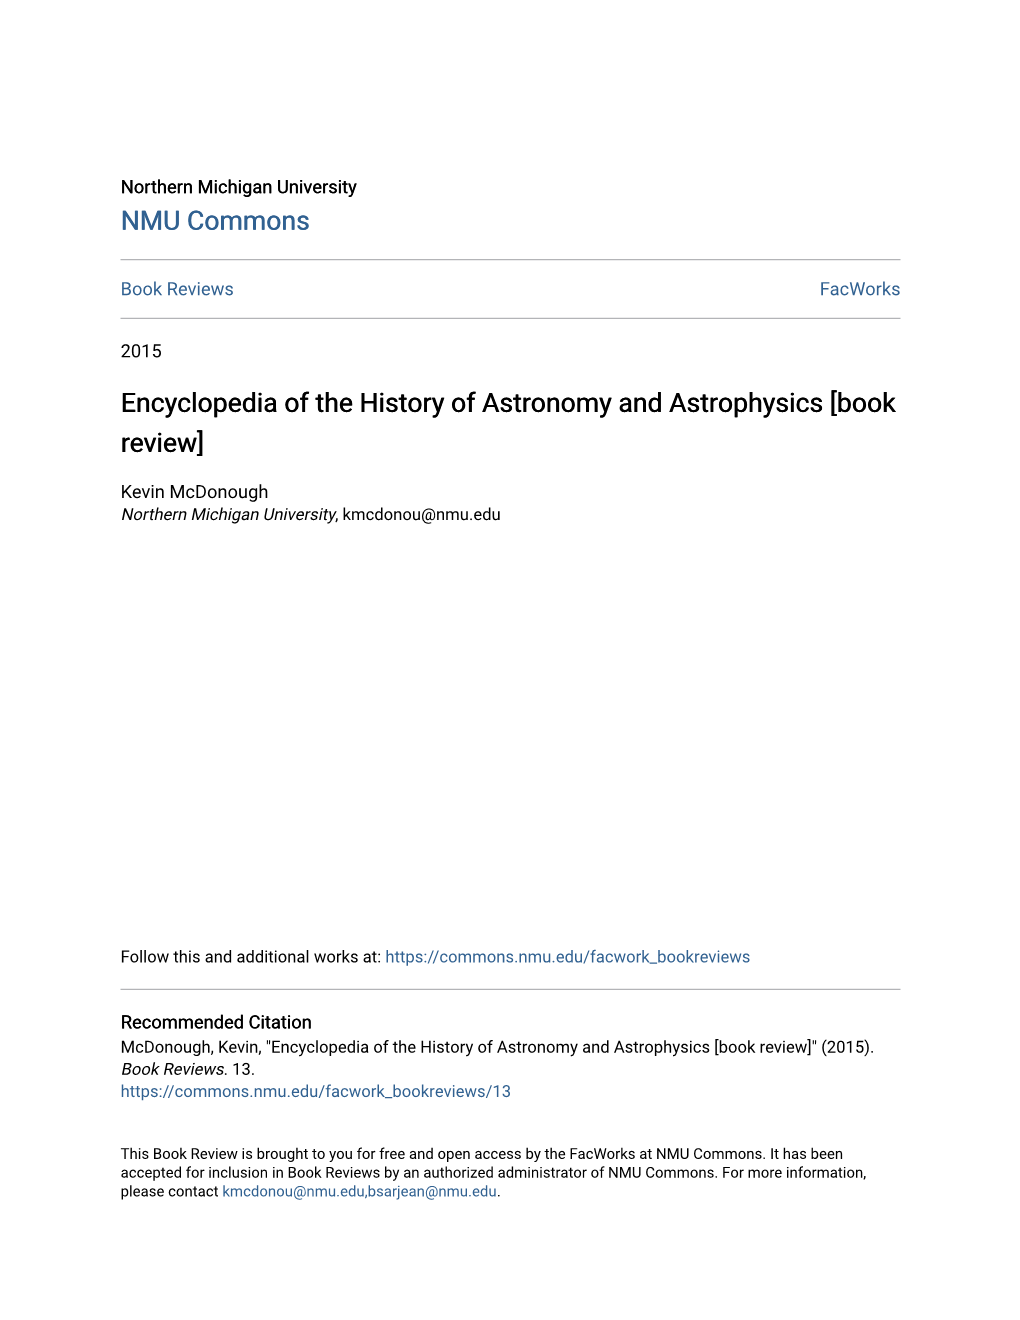 Encyclopedia of the History of Astronomy and Astrophysics [Book Review]